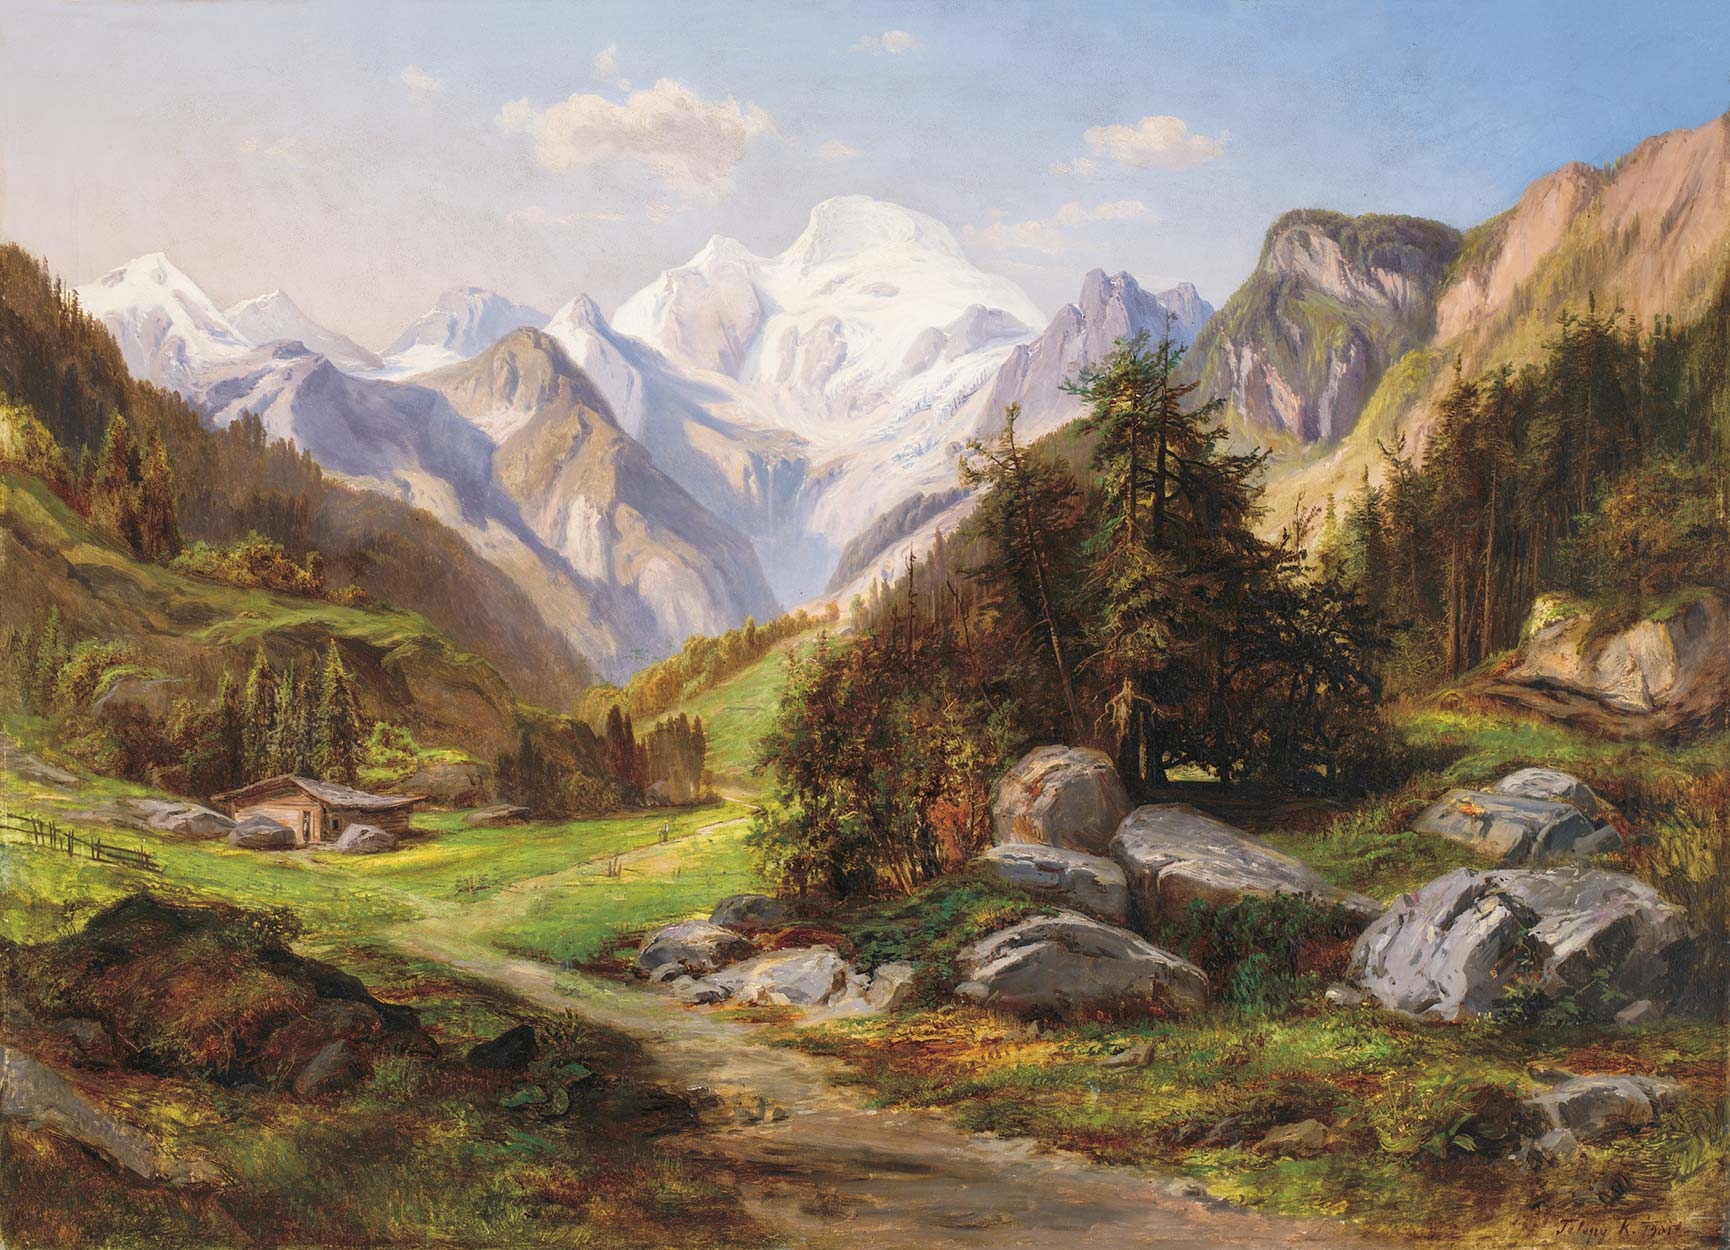 Telepy Károly (1828-1906) In the valley, 1901